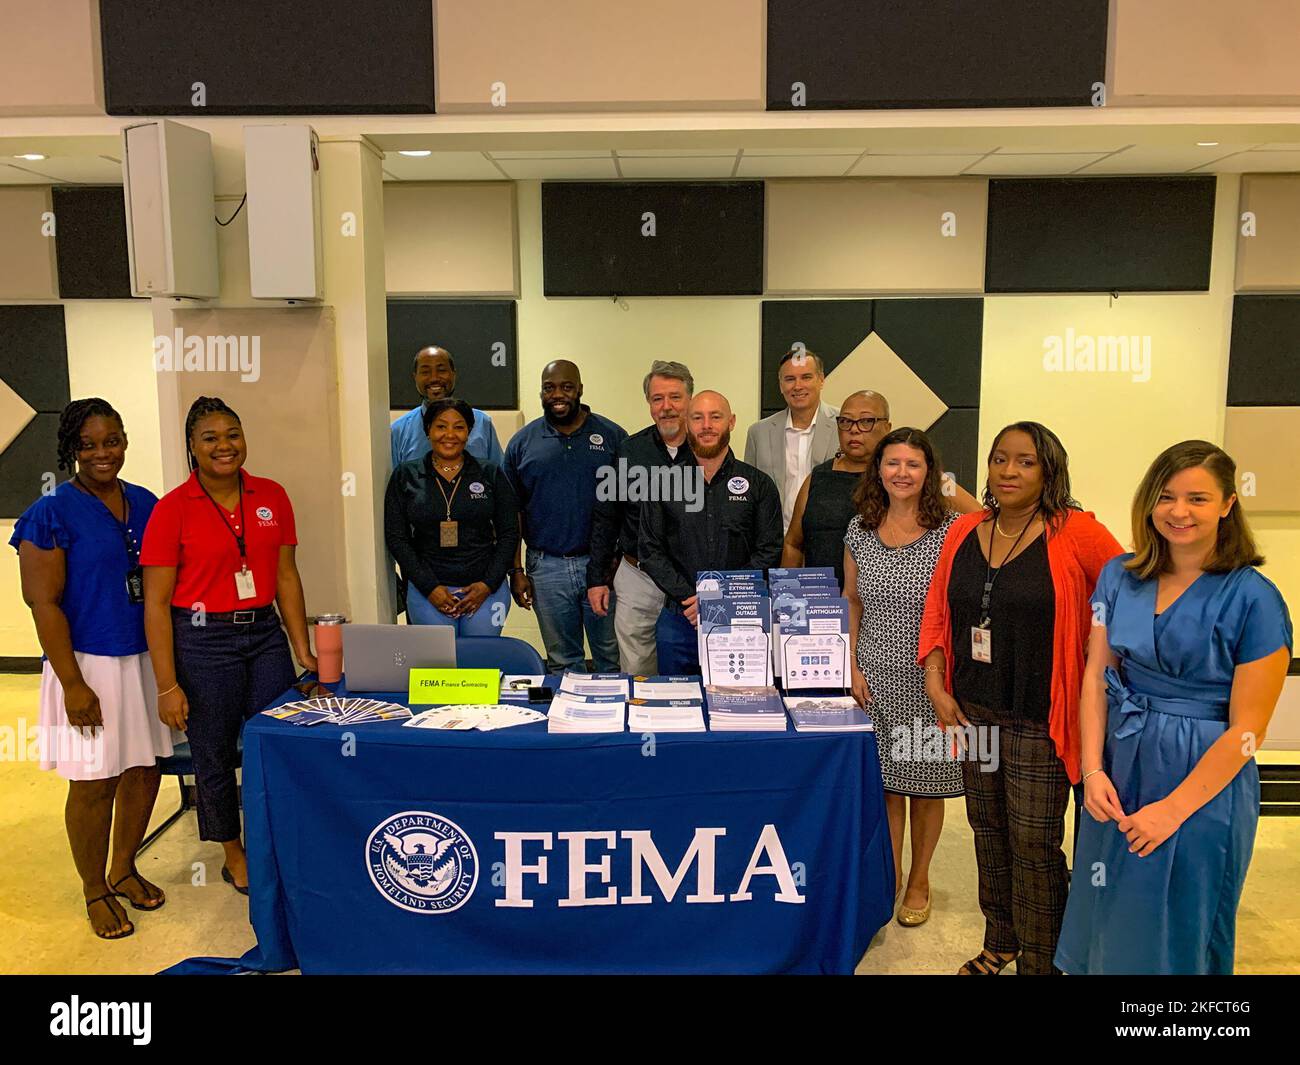 St. Croix, U.S. Virgin Islands, Sept. 7, 2022 -- FEMA's Interagency Recovery Coordination team helped coordinate a workshop to provide local businesses opportunities to get involved with Hurricane Maria recovery projects at the Albert A. Sheen campus of the University of the Virgin Islands. The workshop was led by the Minority Business Development Agency. FEMA/Marisa Allen Stock Photo